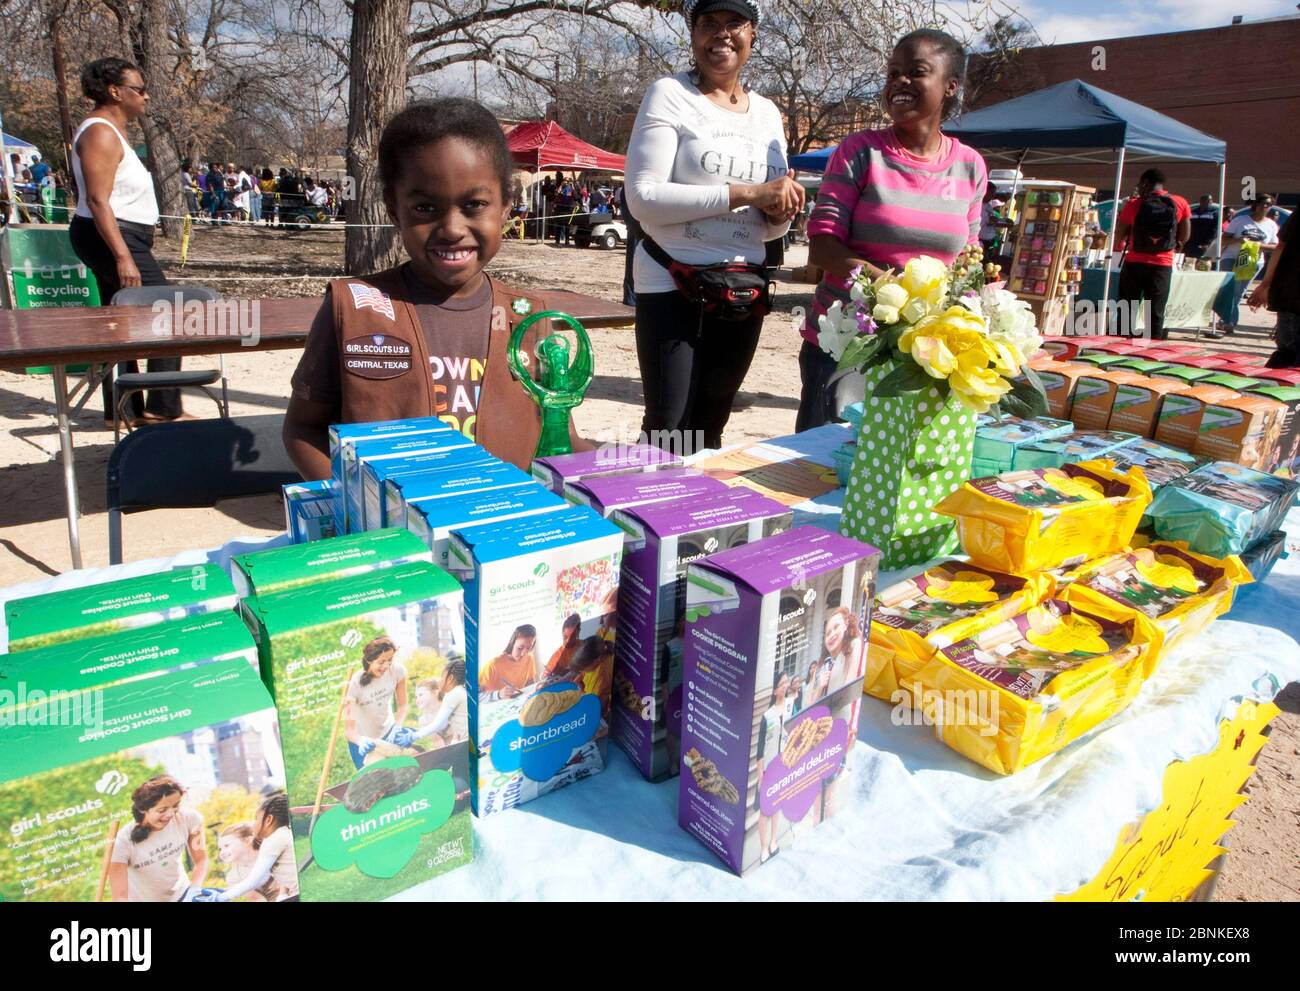 Austin Texas USA, January 21, 2013: Young Black Girl Scout sets up her Girl Scout cookies for sale at an outdoor festival at small college campus on the Martin Luther King Jr. birthday holiday. Stock Photo